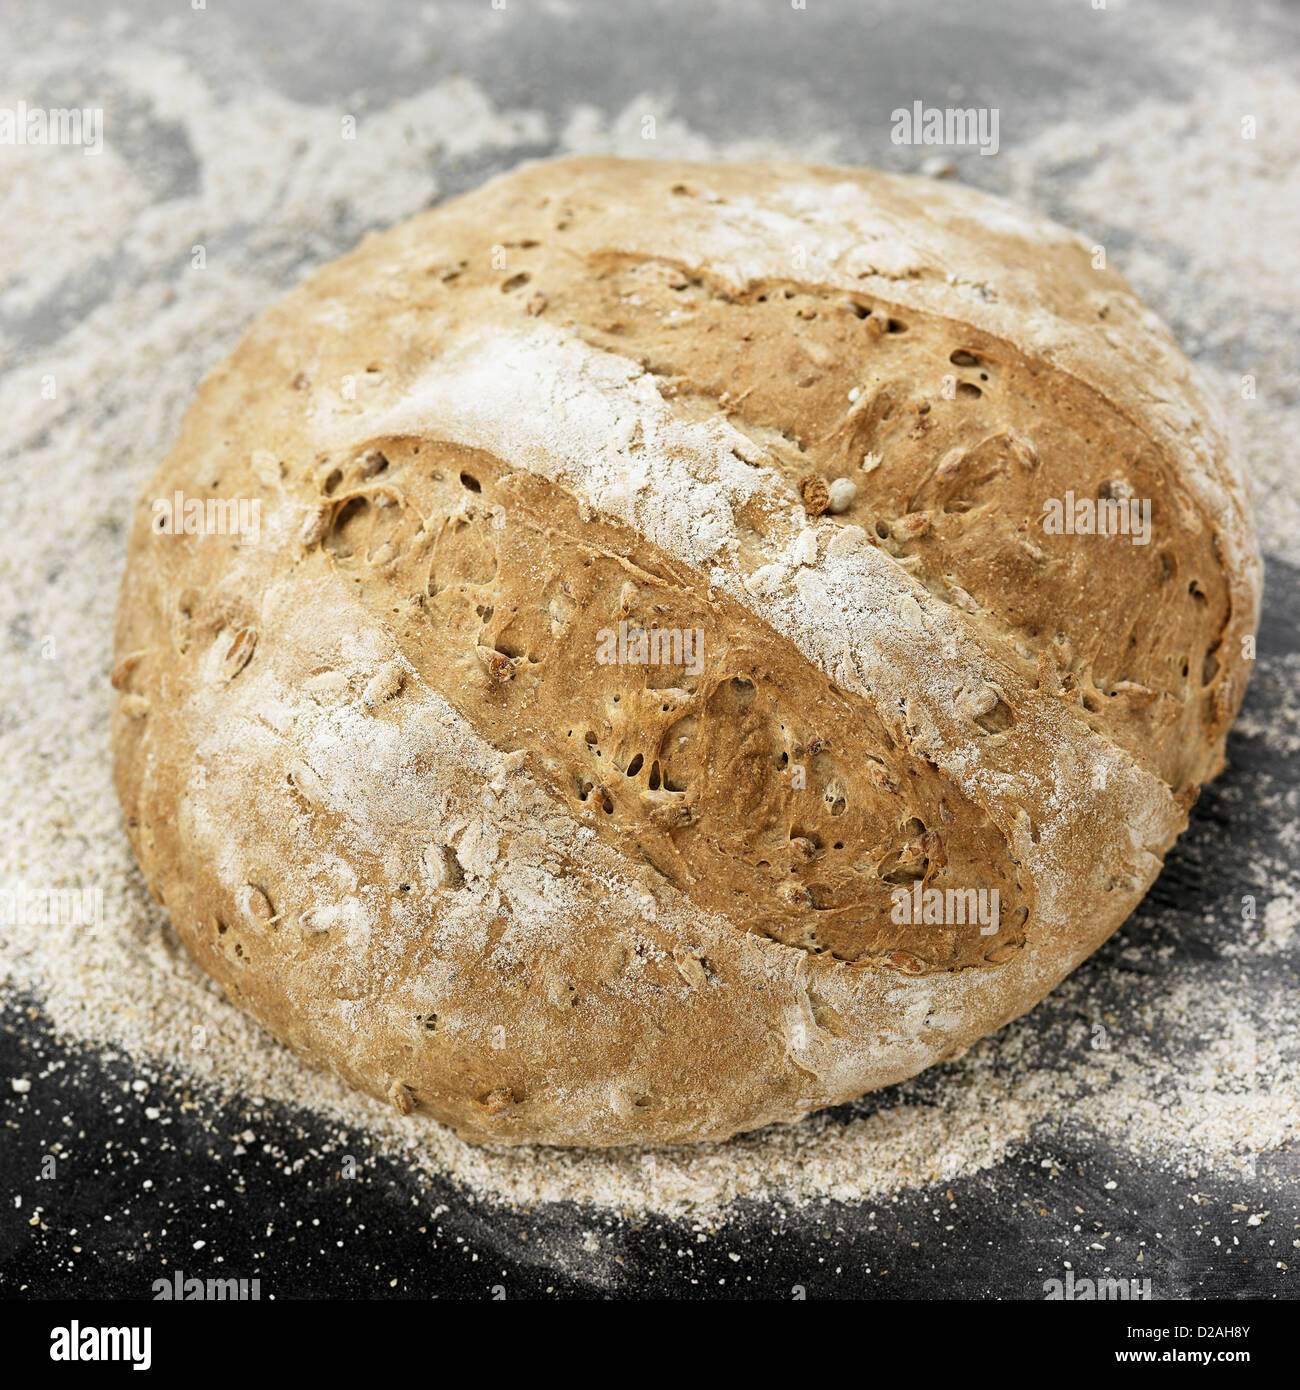 Close up of fresh baked loaf of bread Stock Photo